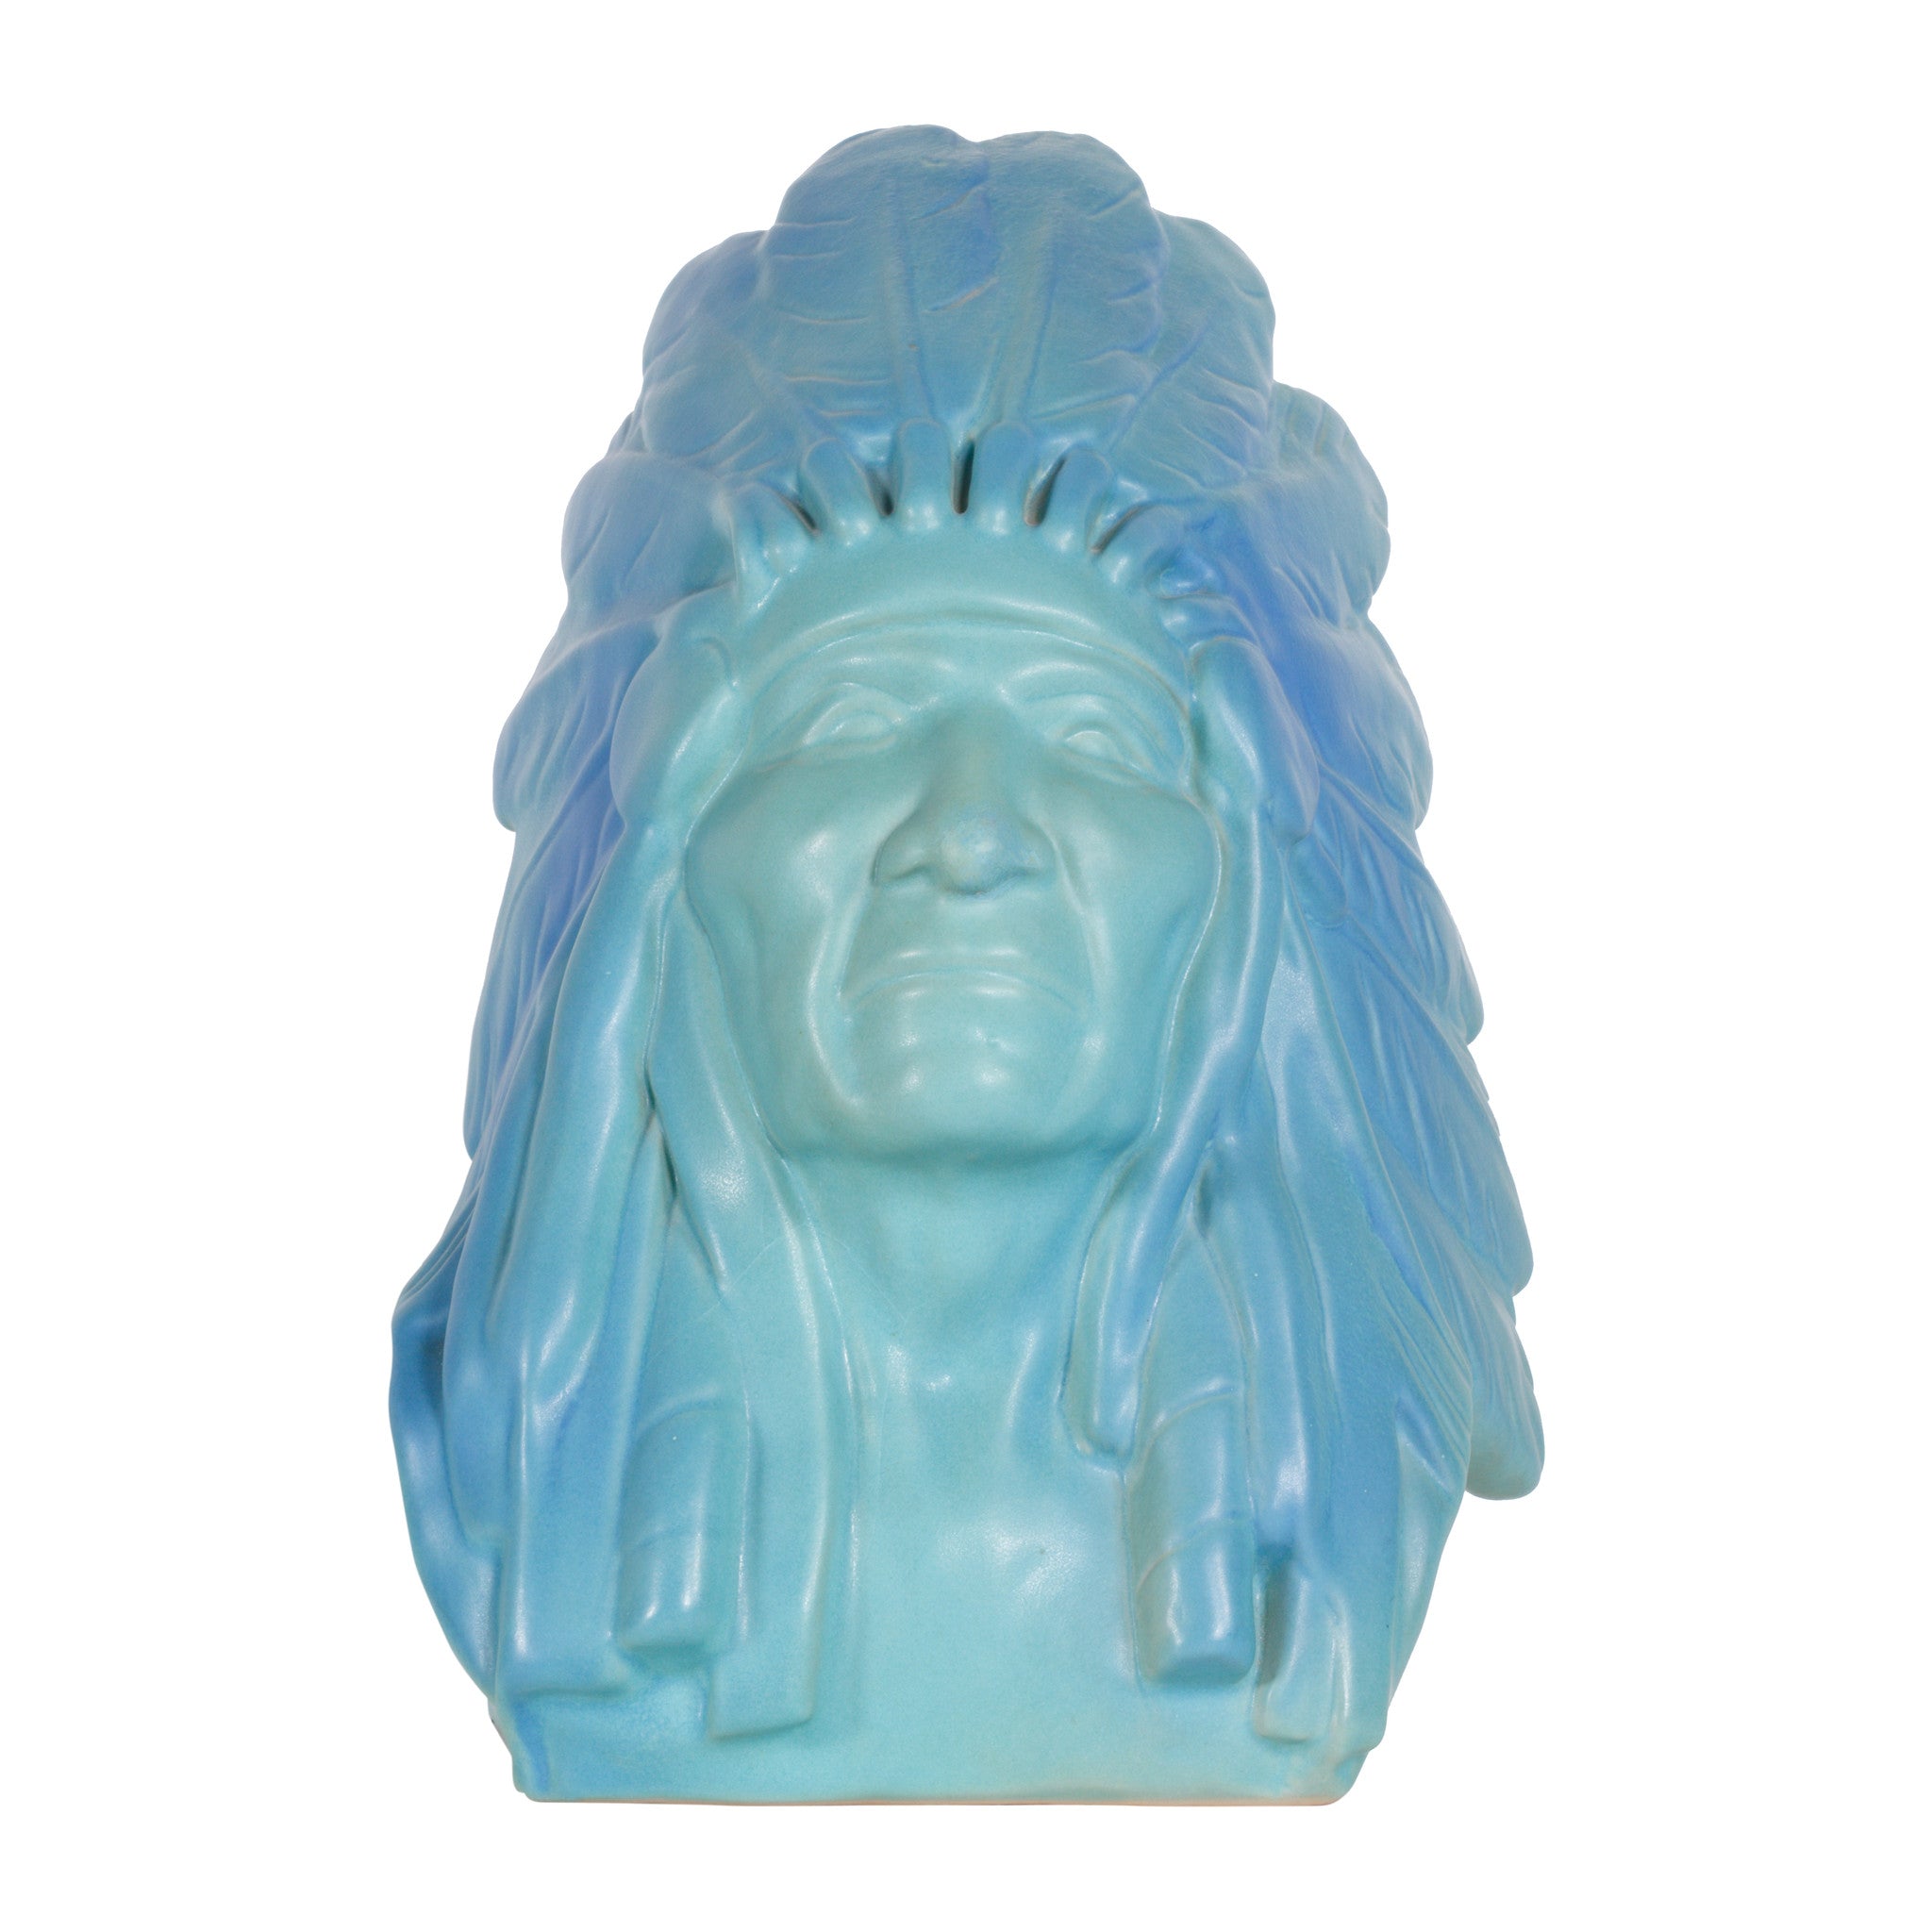 Chief Two Moons Ceramic Bust